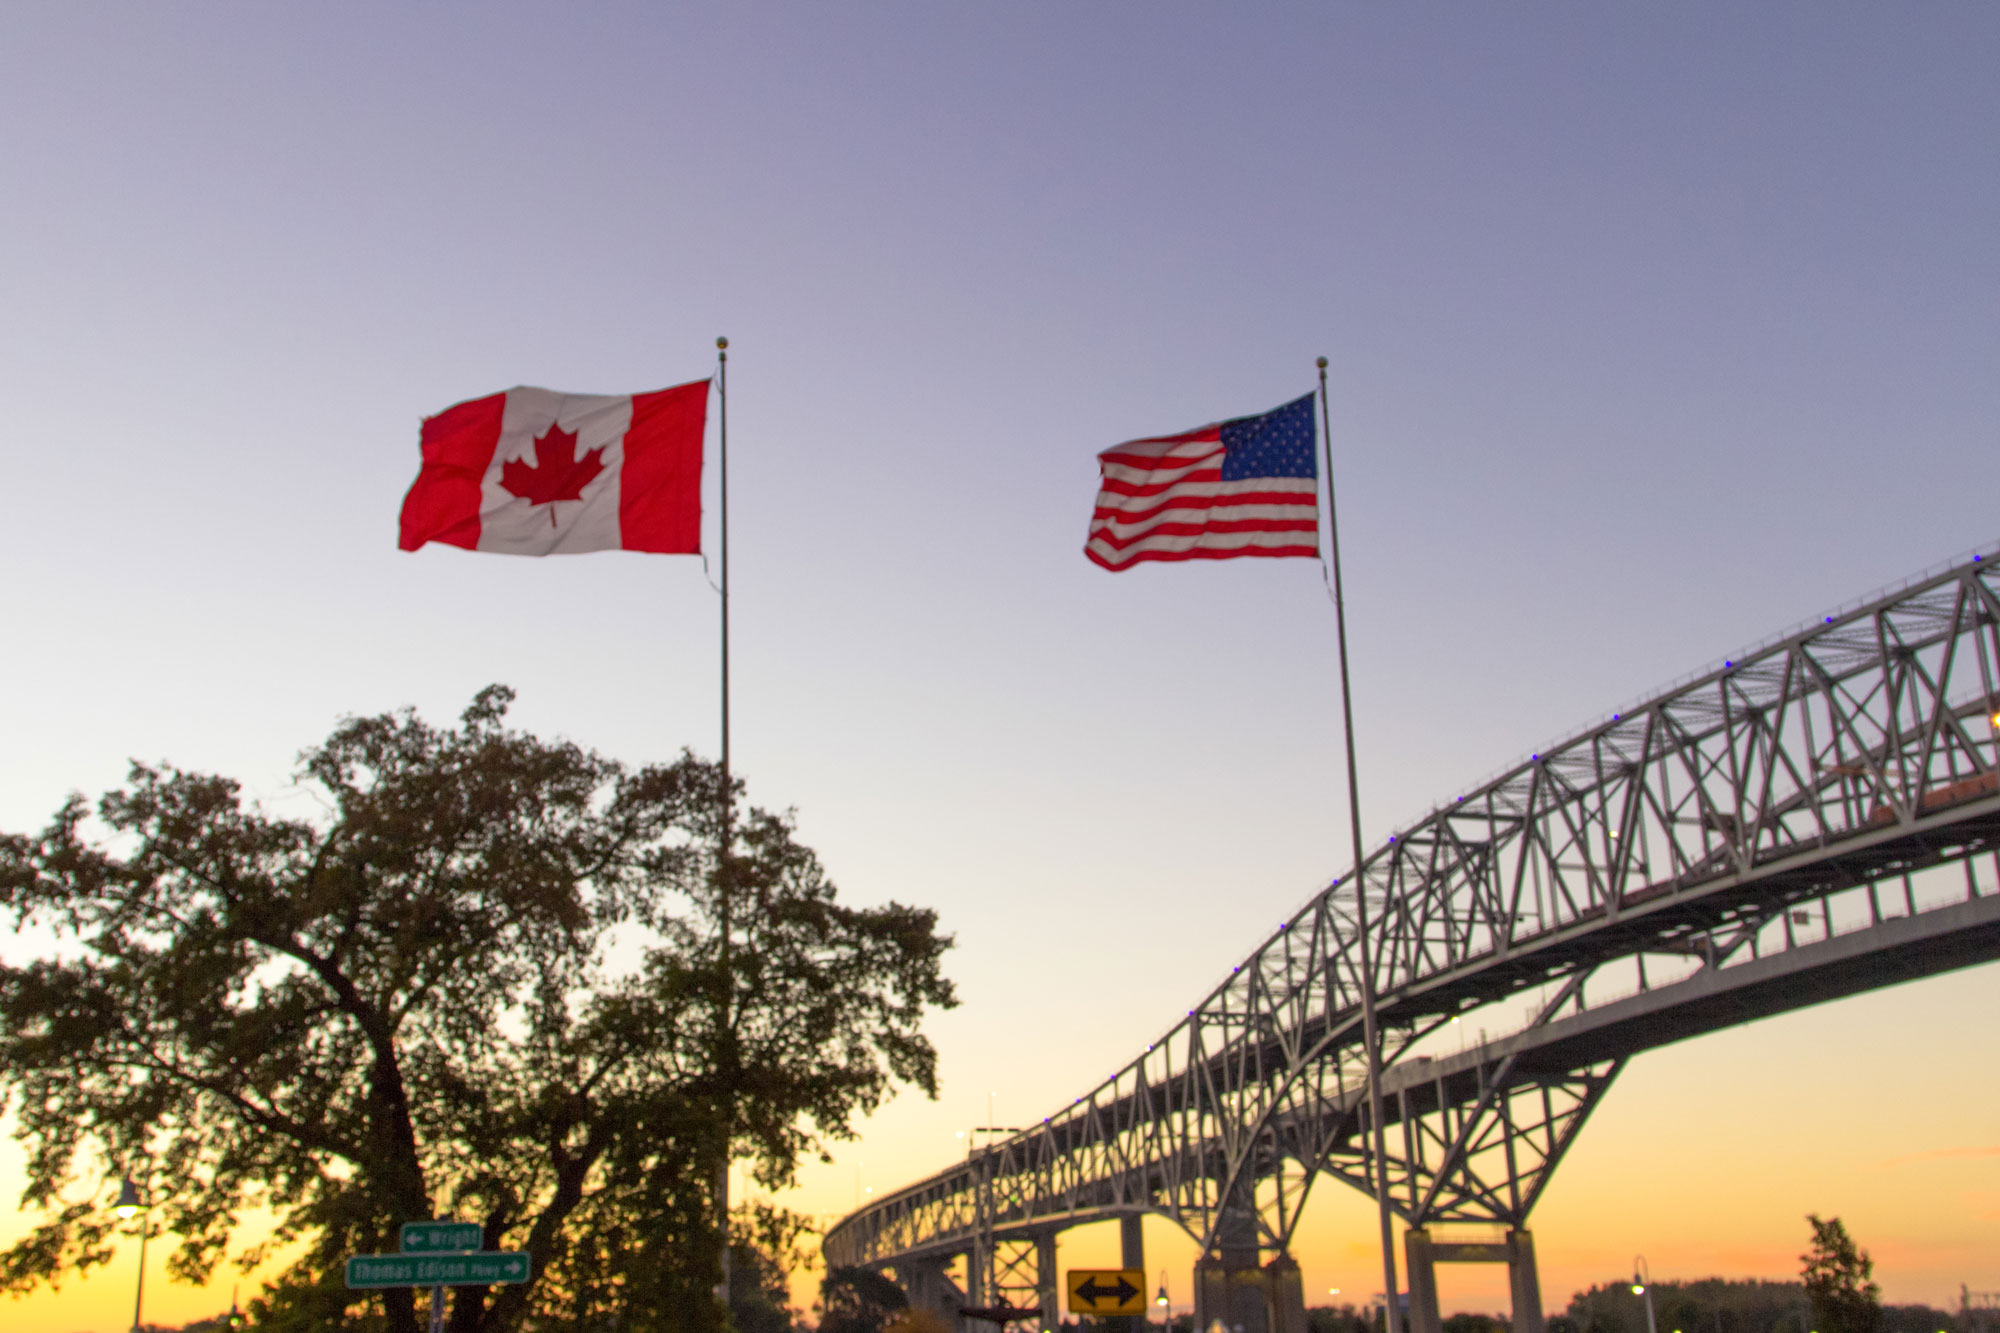 Canadian and U.S. flags